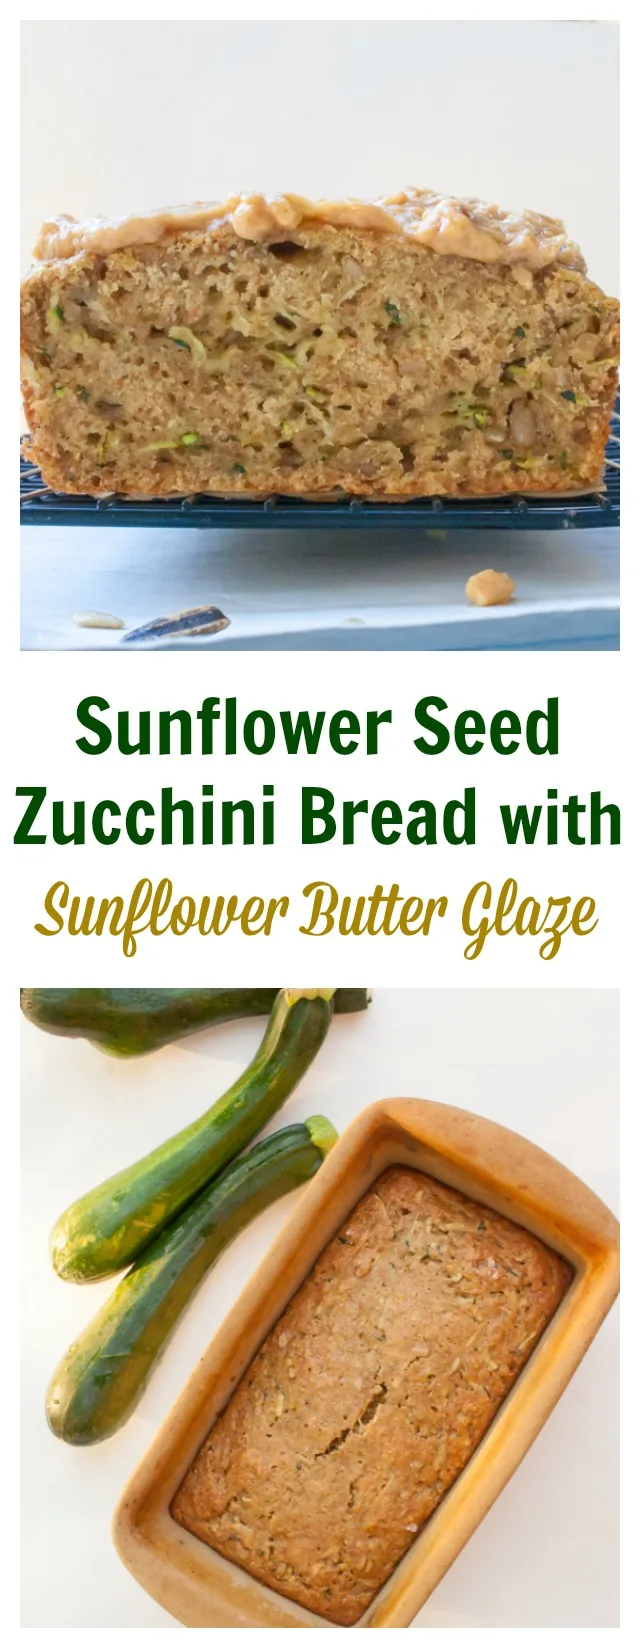 Sweet and healthy back to school breakfast >> Zucchini Bread with Sunflower Butter Glaze | @TspCurry